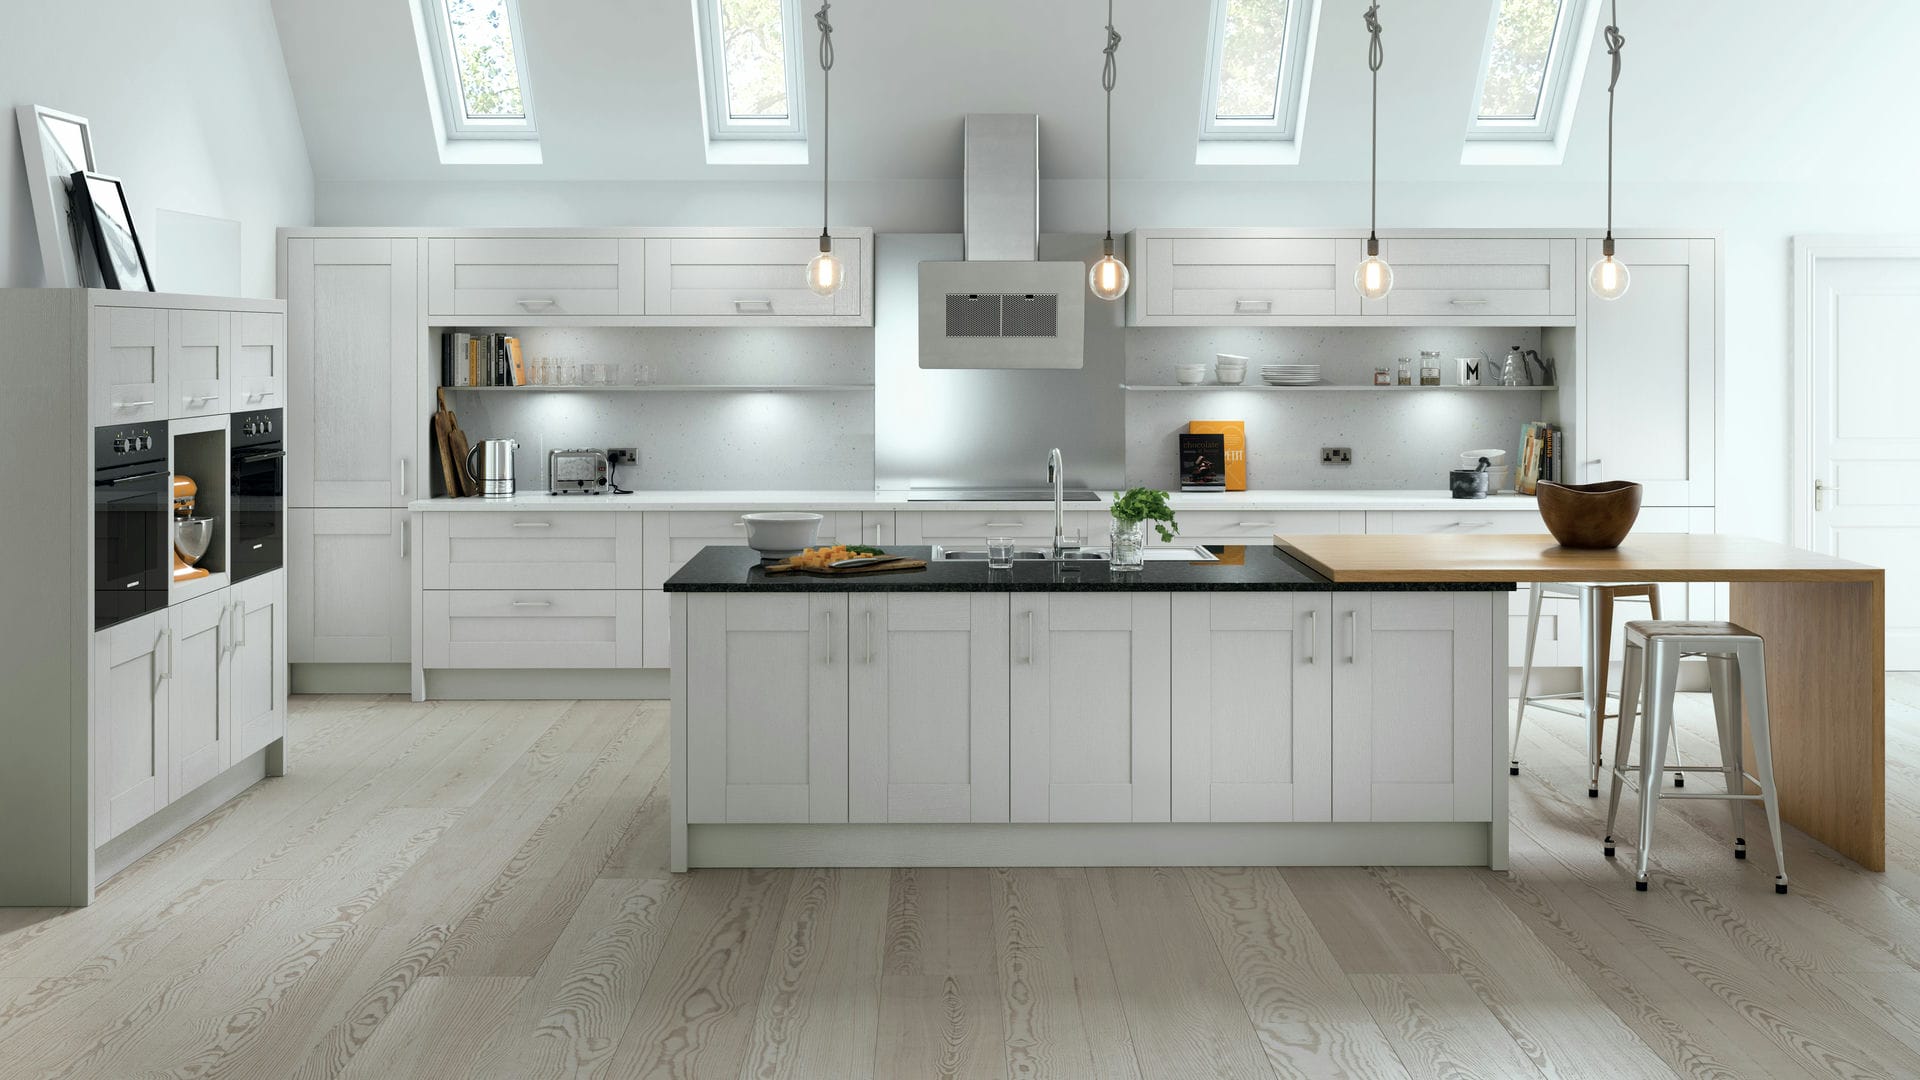 Luxury shaker dove grey kitchens combining timeless design with a serene grey tone